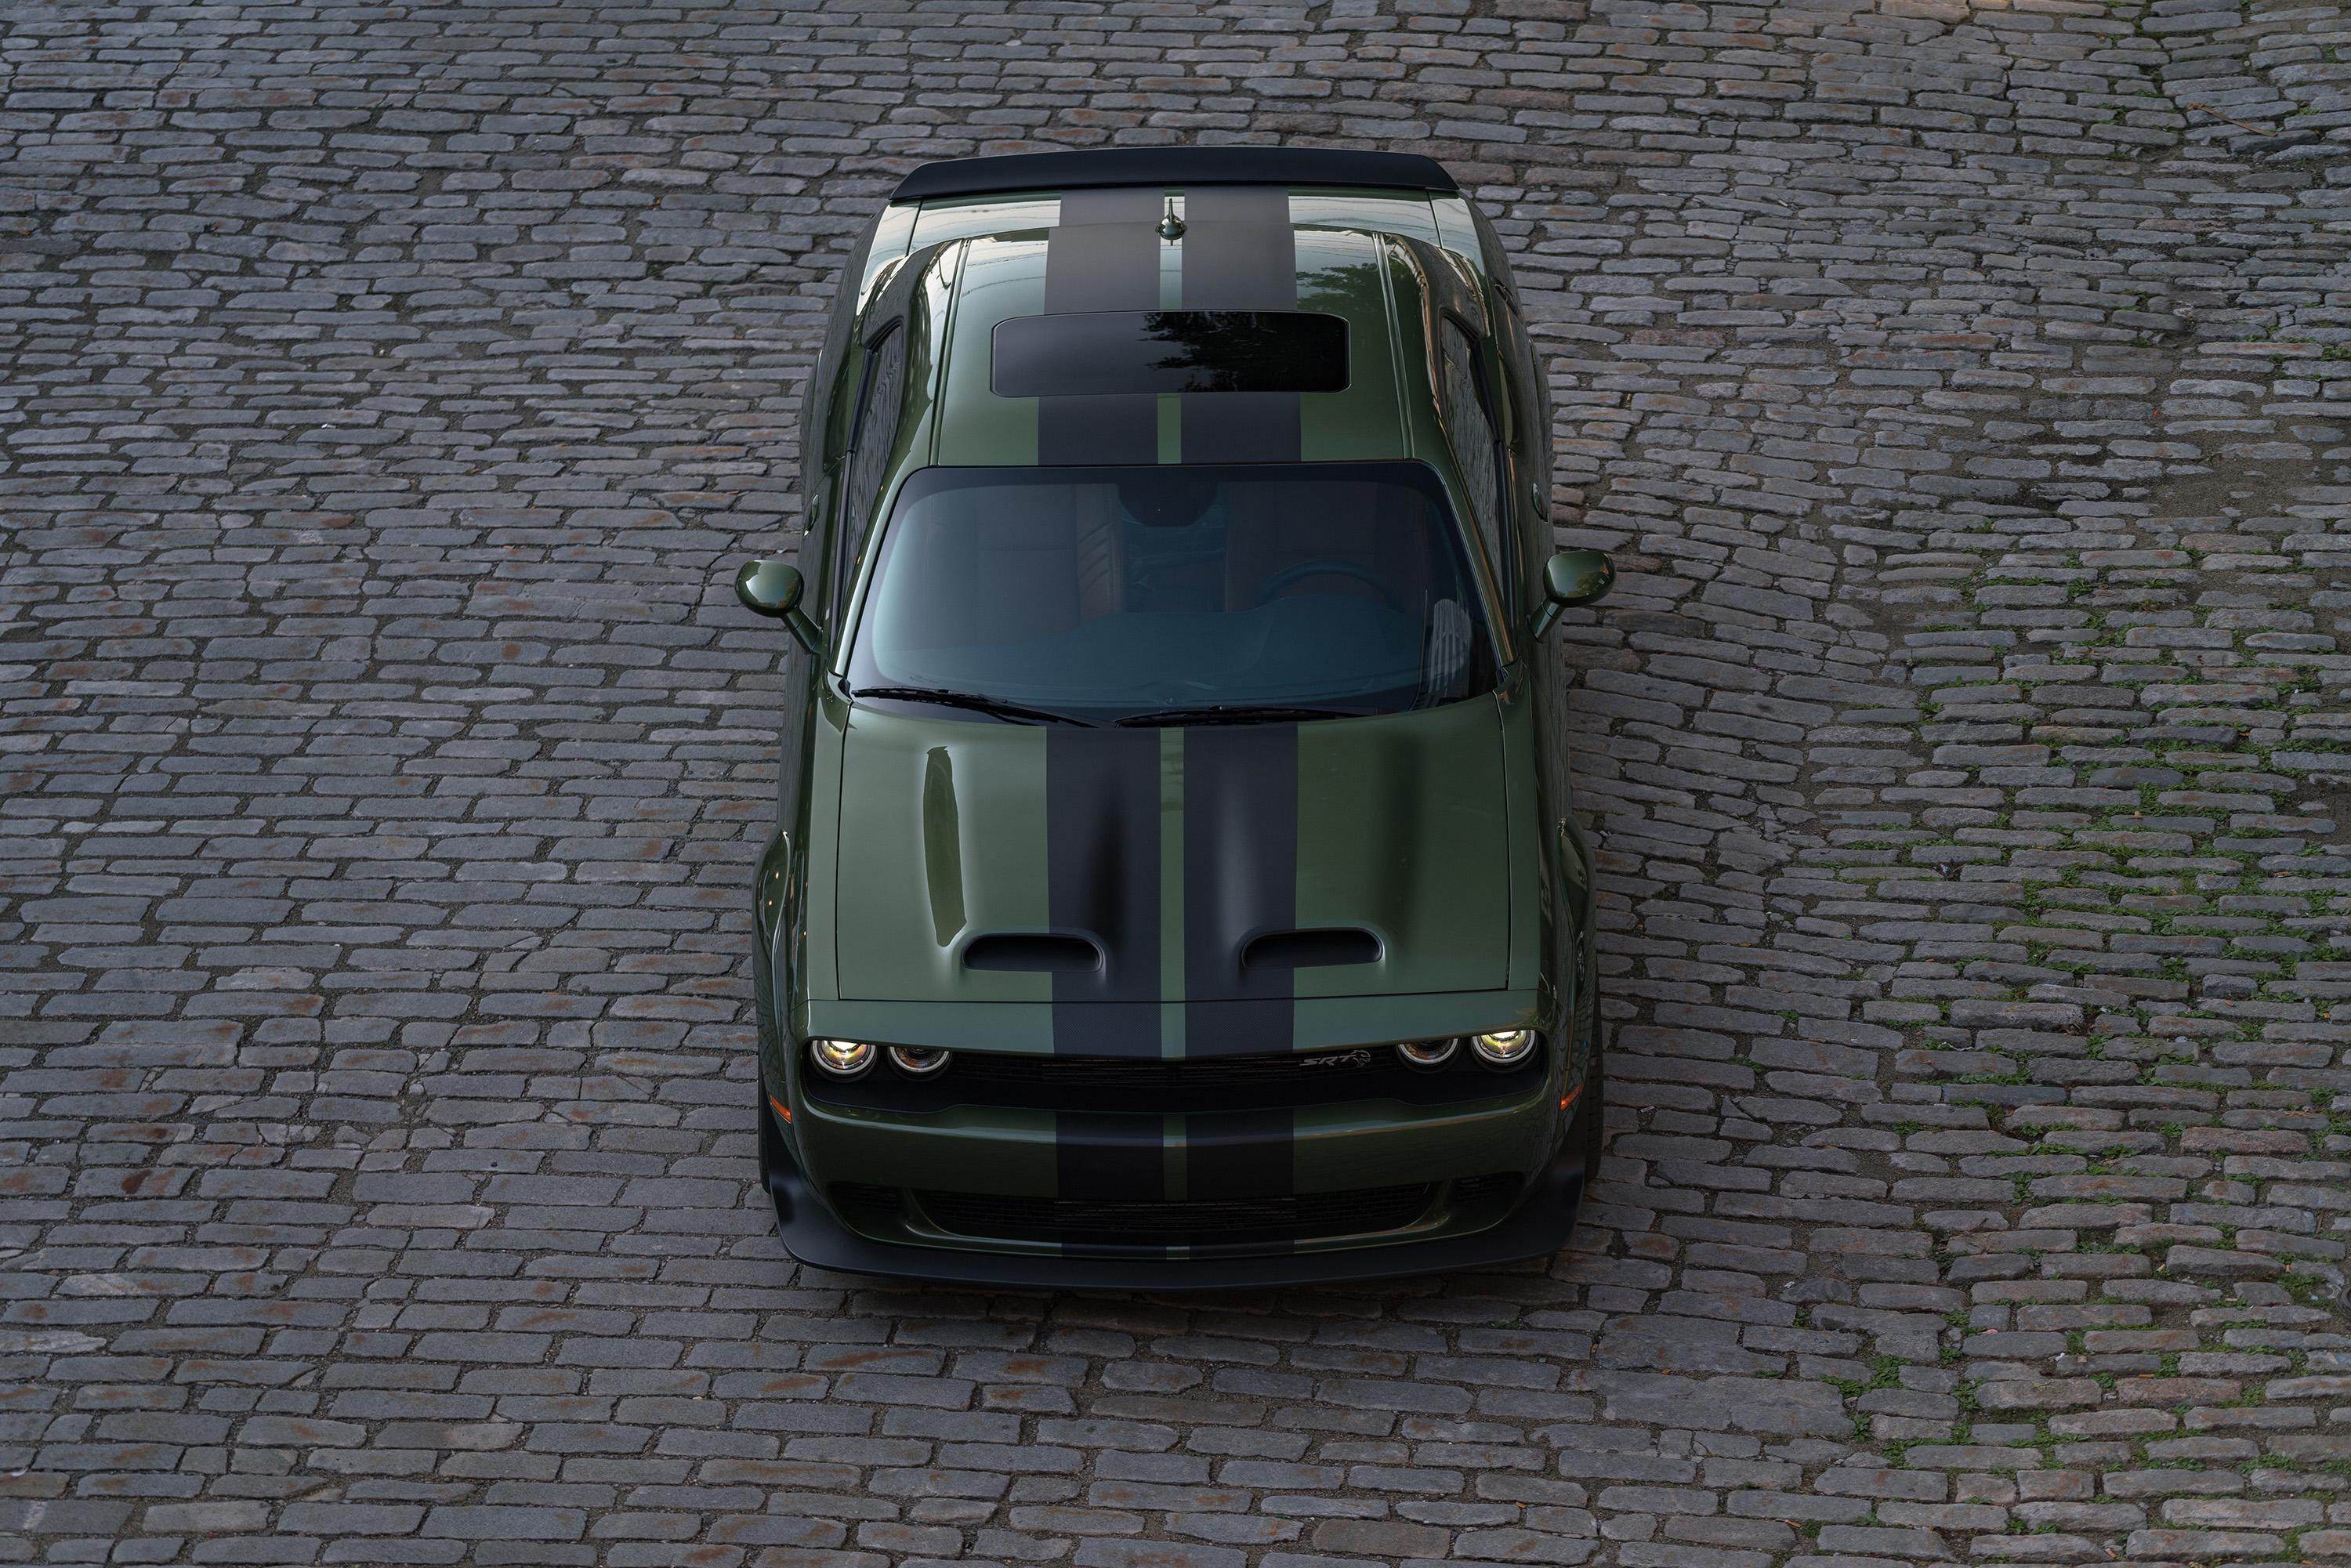 The Dodge Challenger SRT Hellcat Redeye is one of the quickest and strongest models in the Challenger lineup.